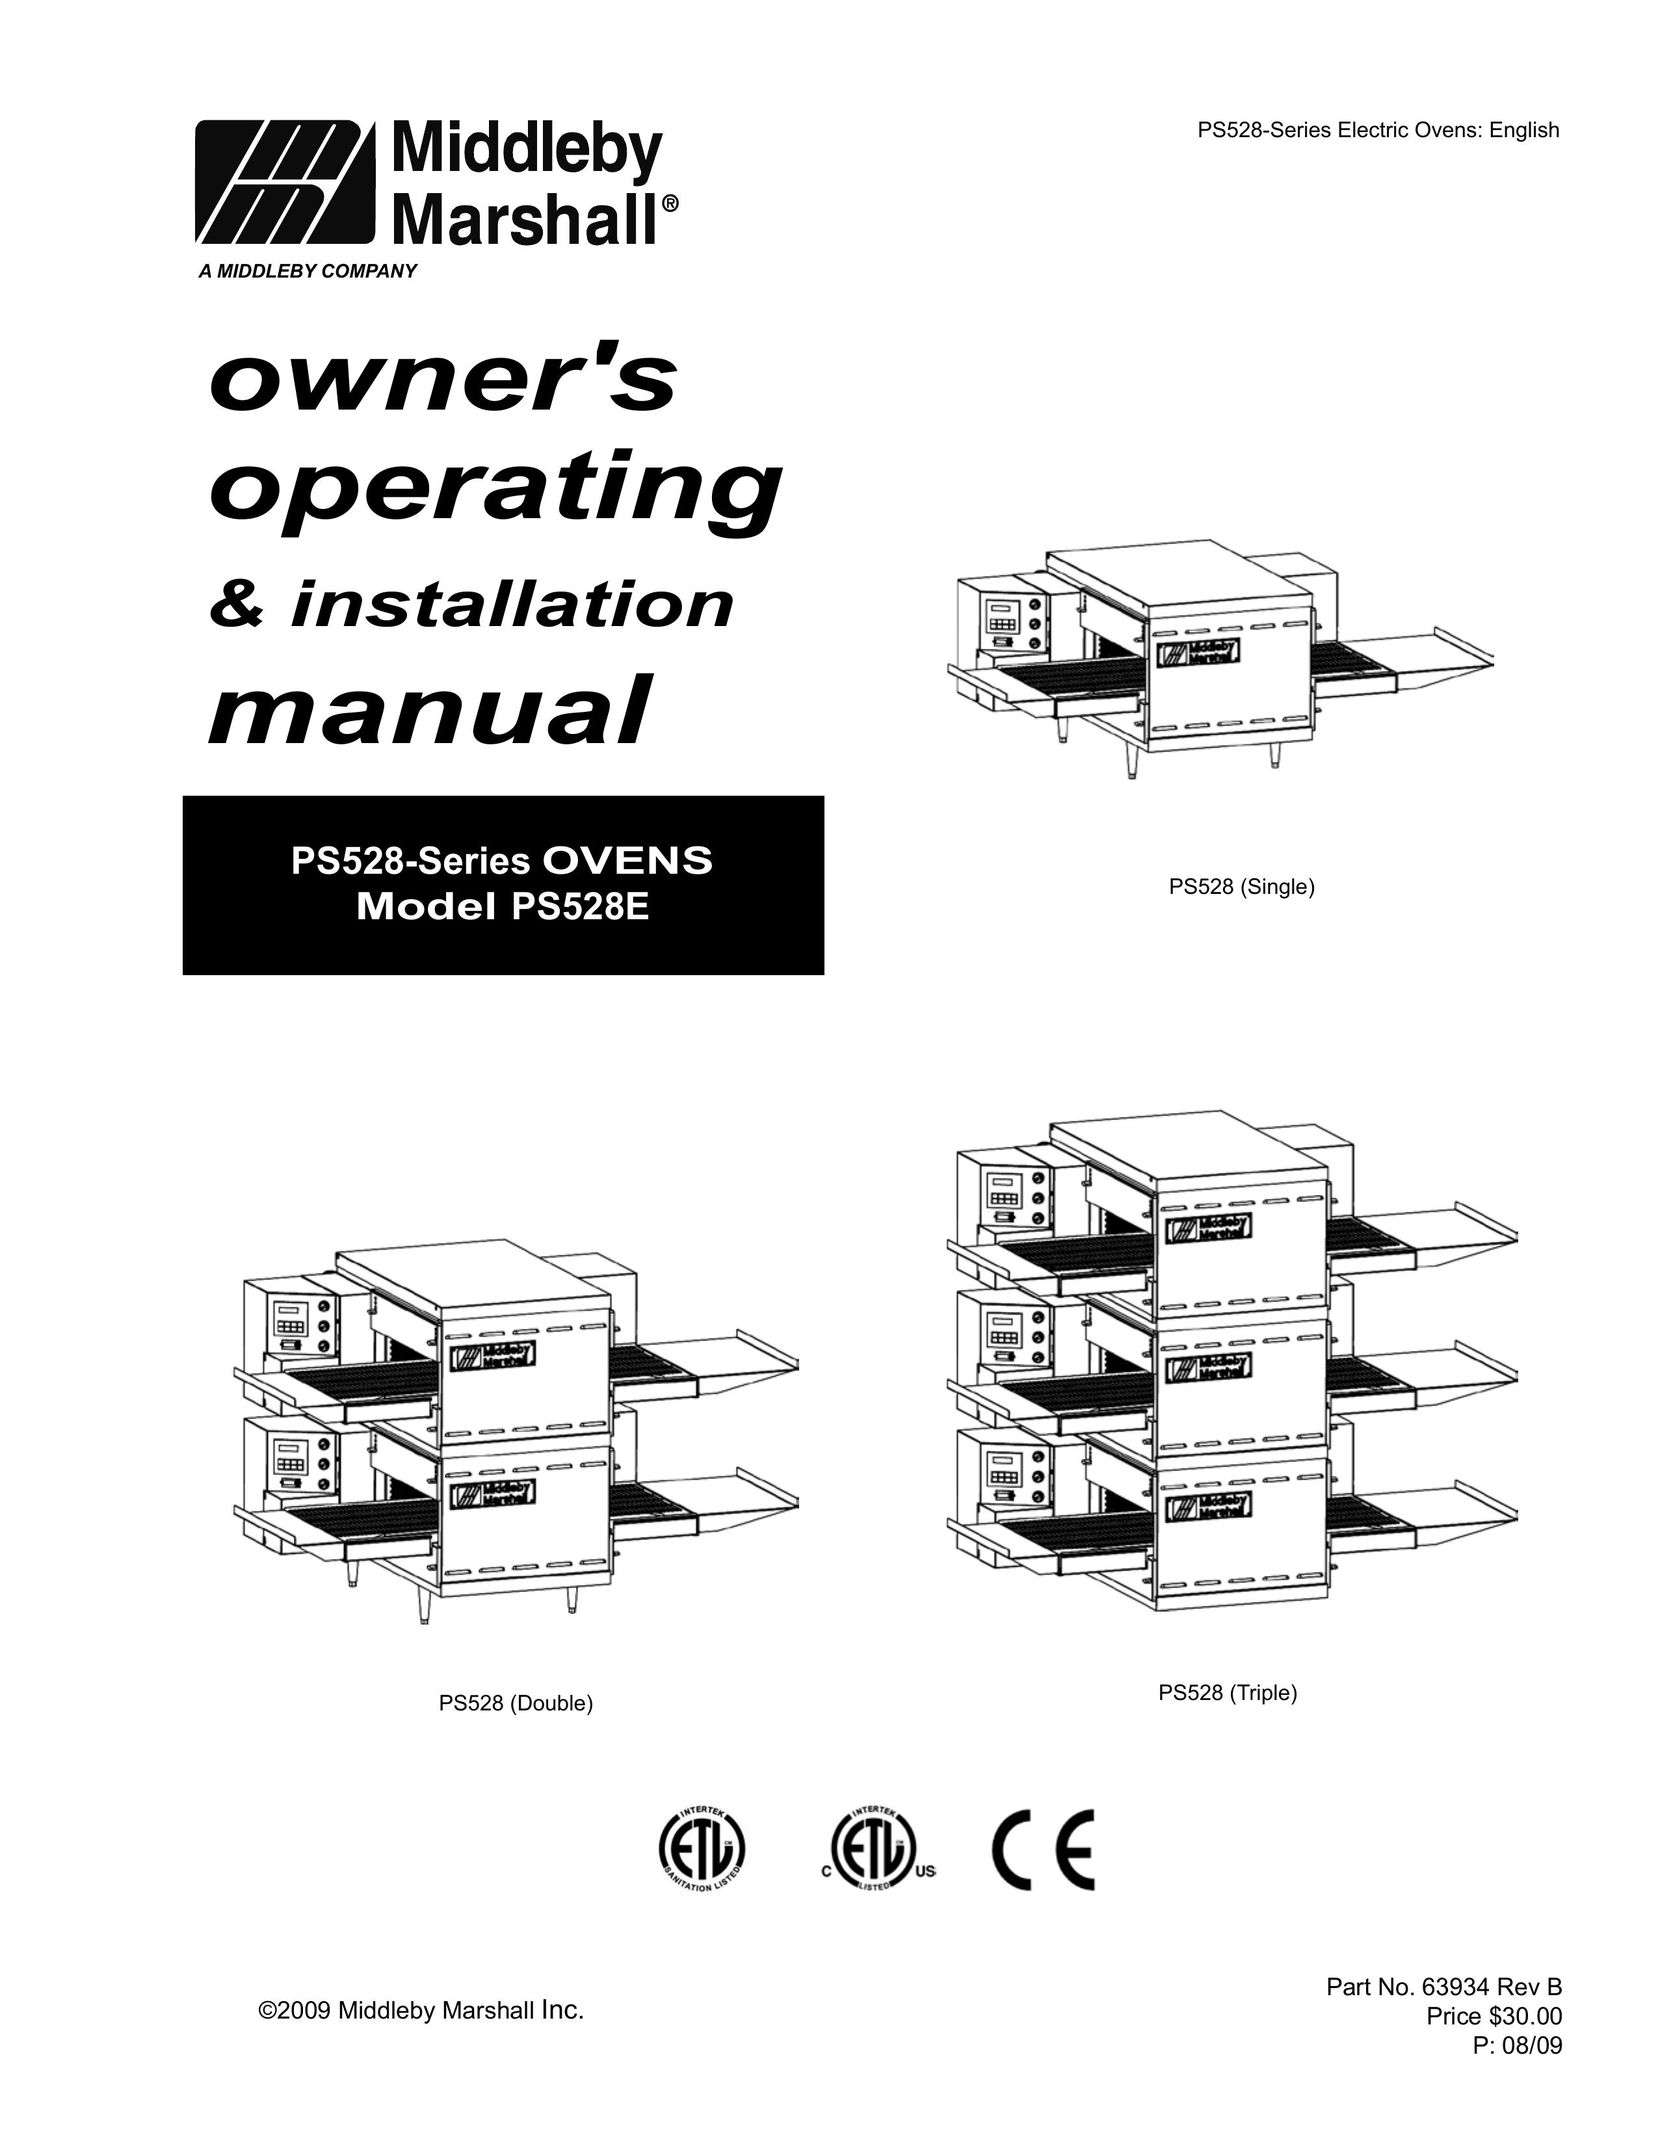 Middleby Marshall PS528E Oven User Manual